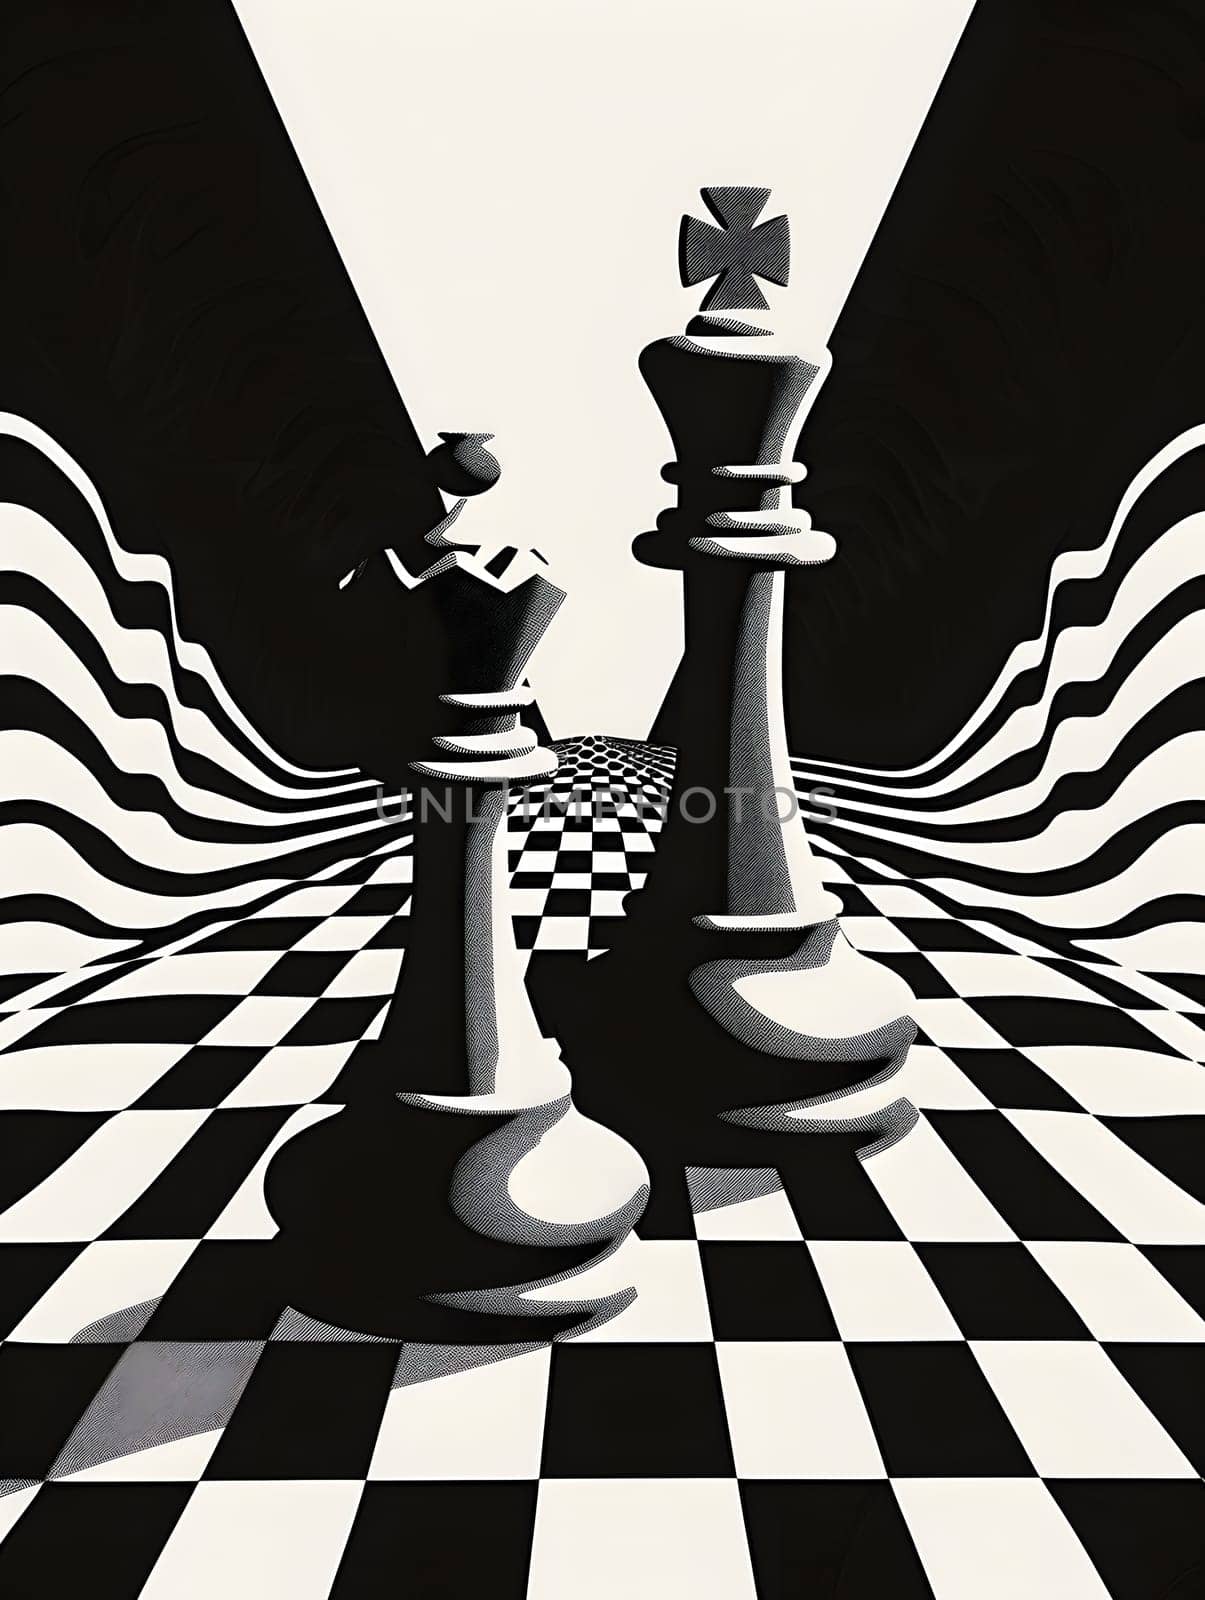 Blackandwhite photograph of two chess pieces on a checkered board by Nadtochiy